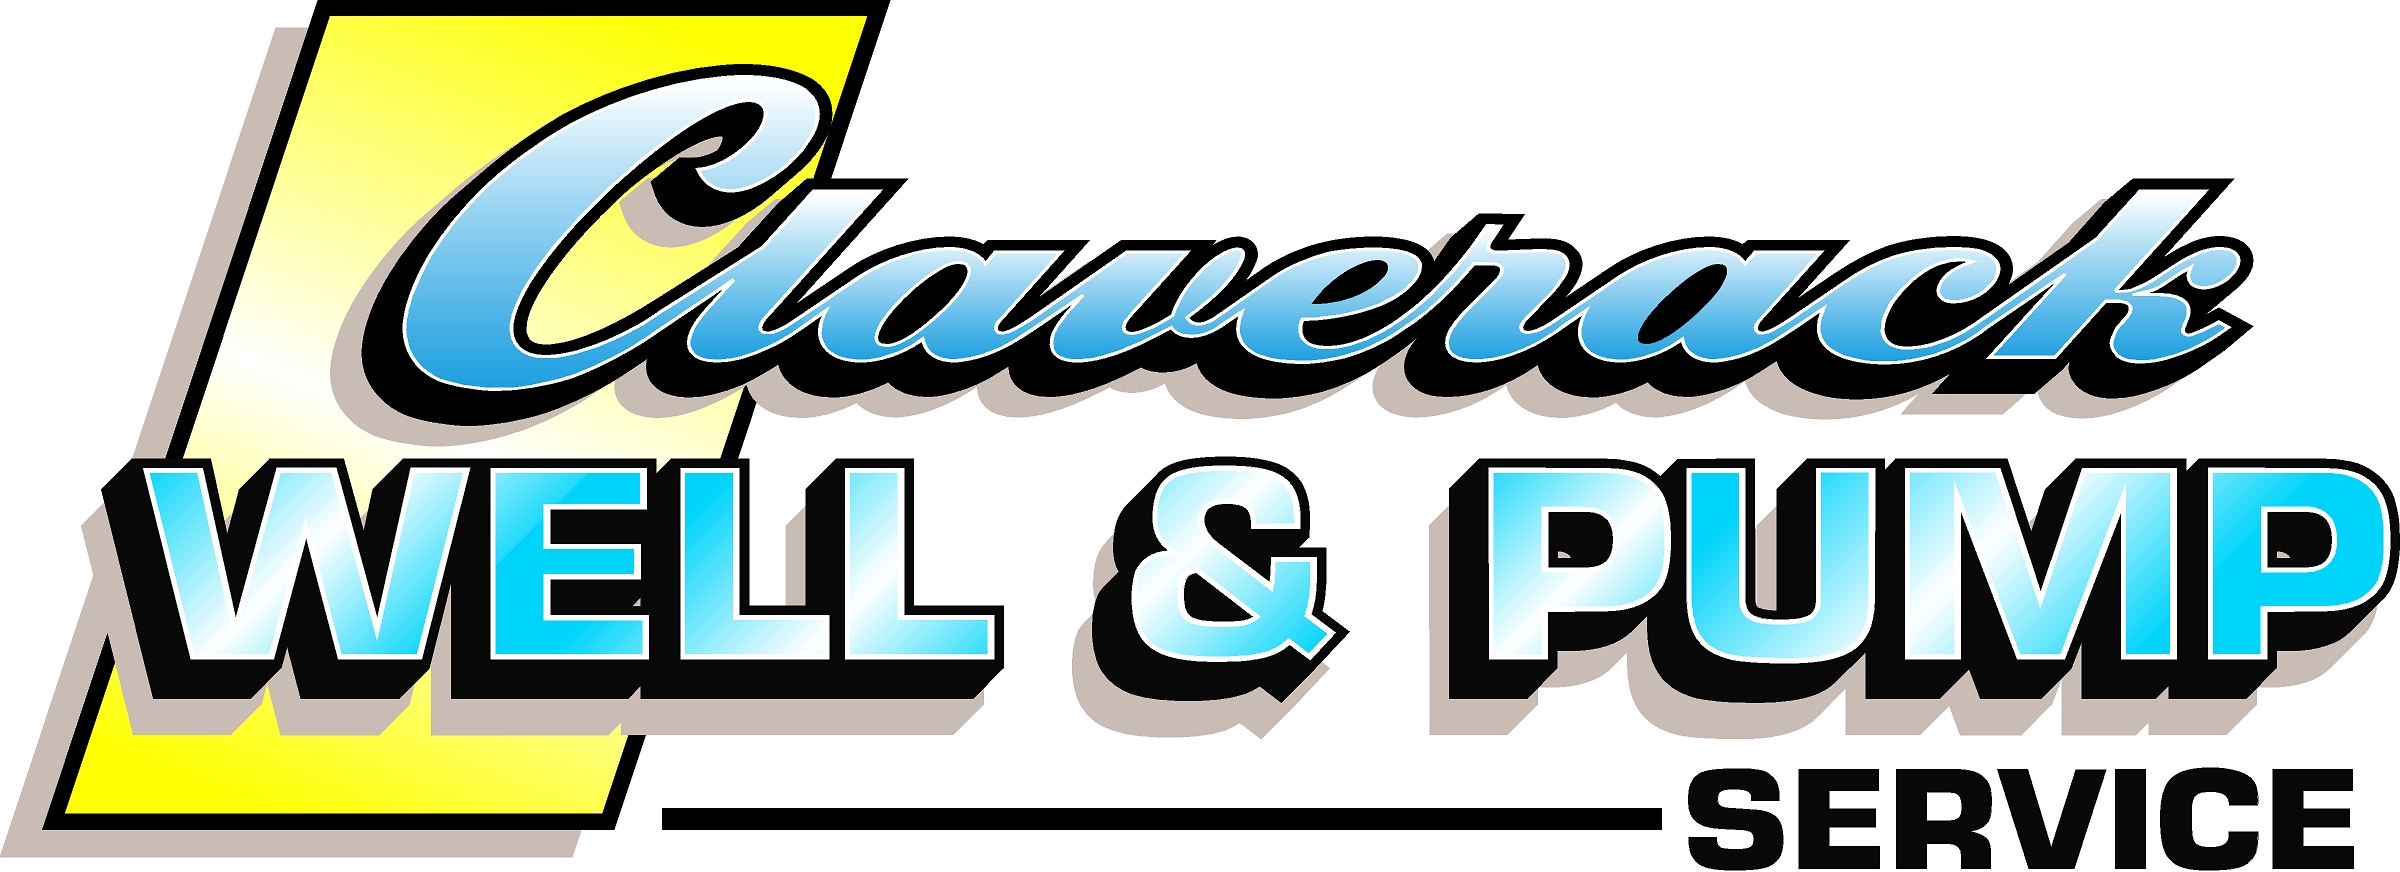 Claverack Well and Pump Service Logo